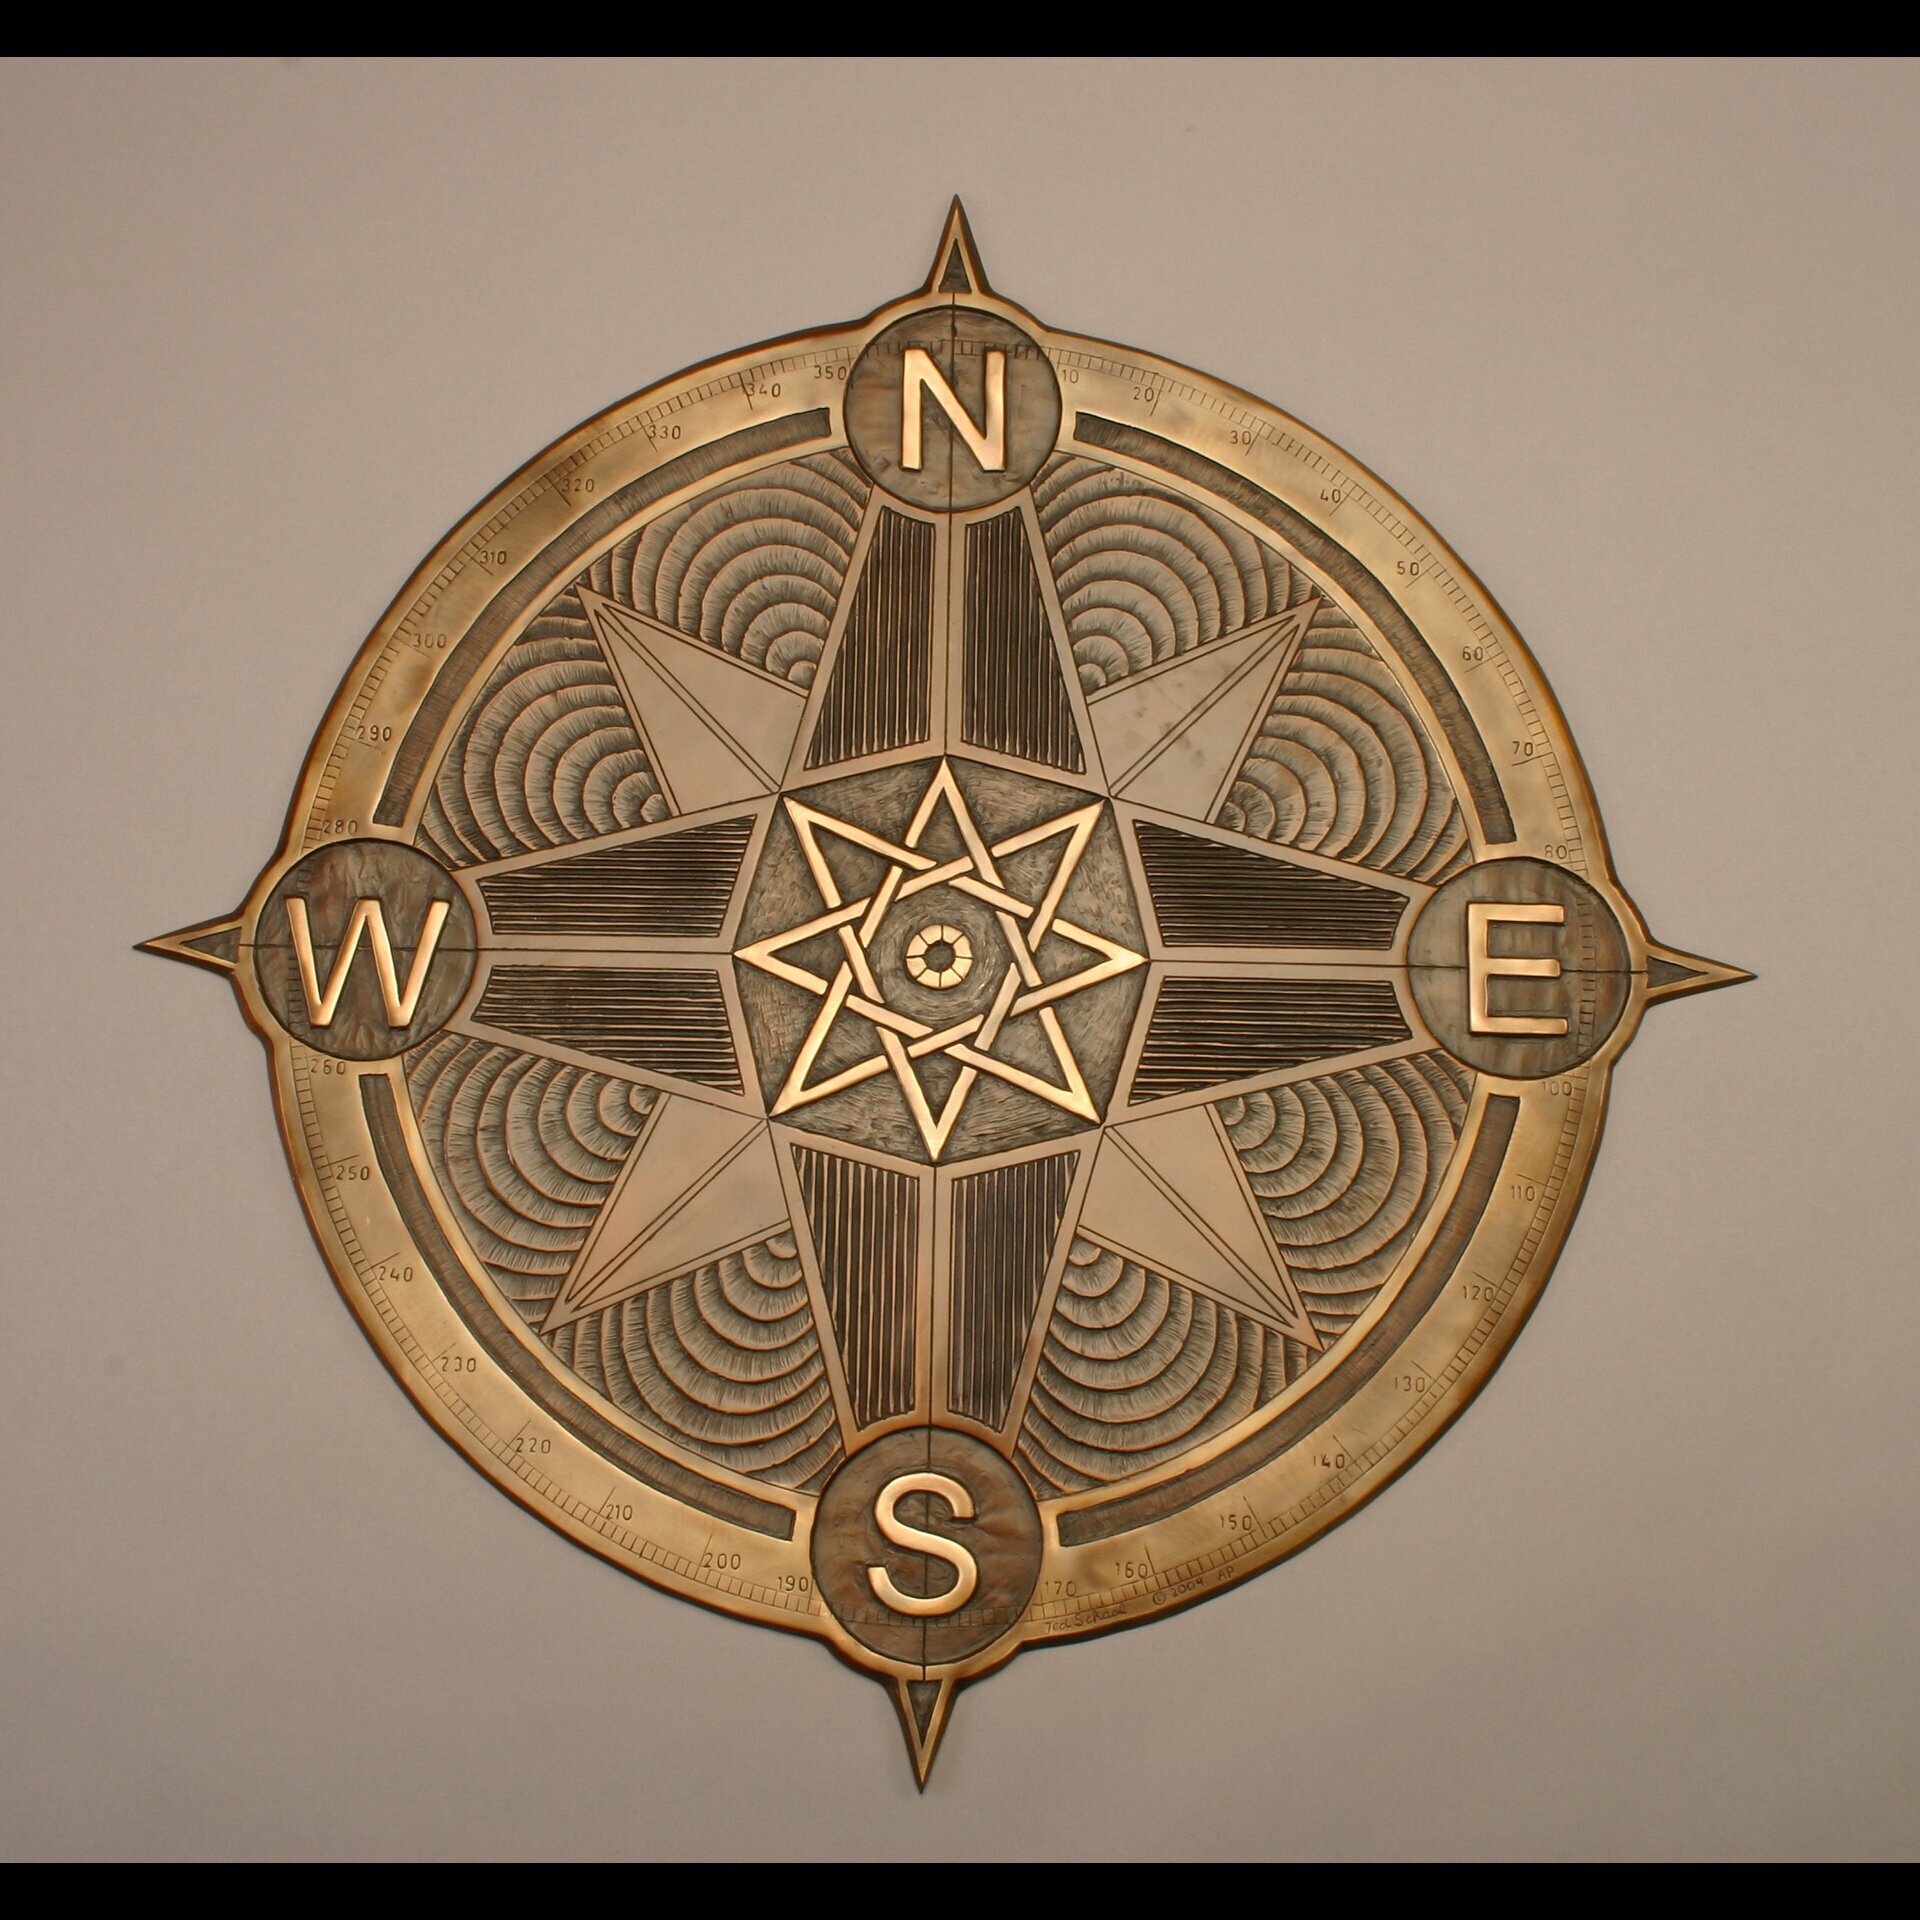 Ted Schaal; Compass Rose With Solstic..., 2004, Original Sculpture Bronze, 50 x 25 inches. Artwork description: 241  Compass rose with Four solstice markers.  Includes hardware for setting in concrete or mounting to stone.  elevations and installation options provided upon request.  Only 16 left in the edition.  Please allow 4 months for delivery. ...